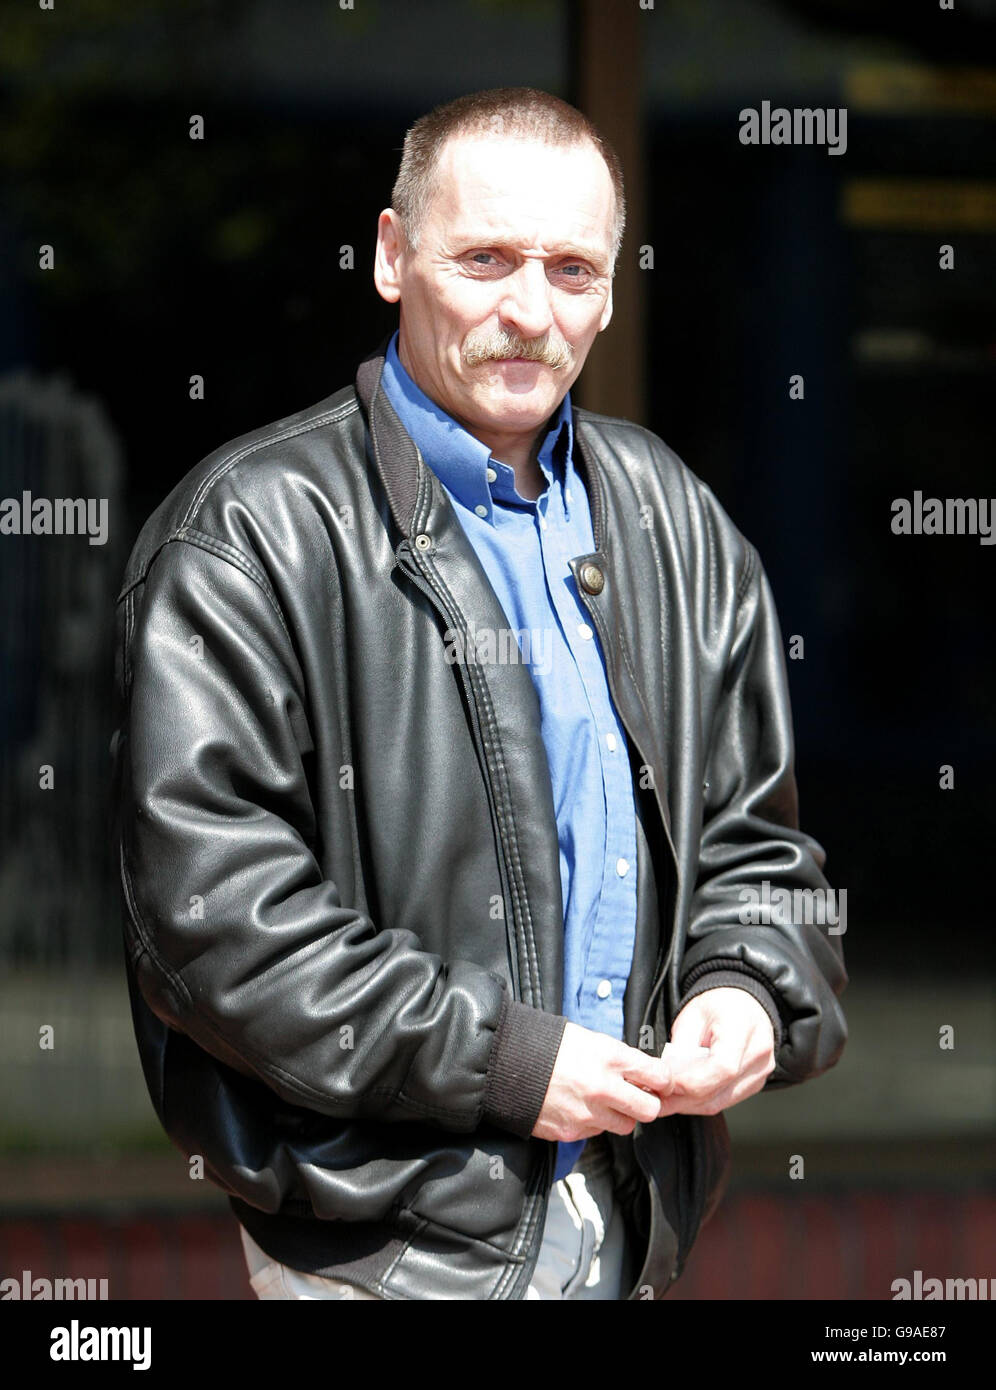 Paul Dunn leaves Stockport Magistrates Court where he appeared accused of threatening to attack two police officers with a snake. Stock Photo